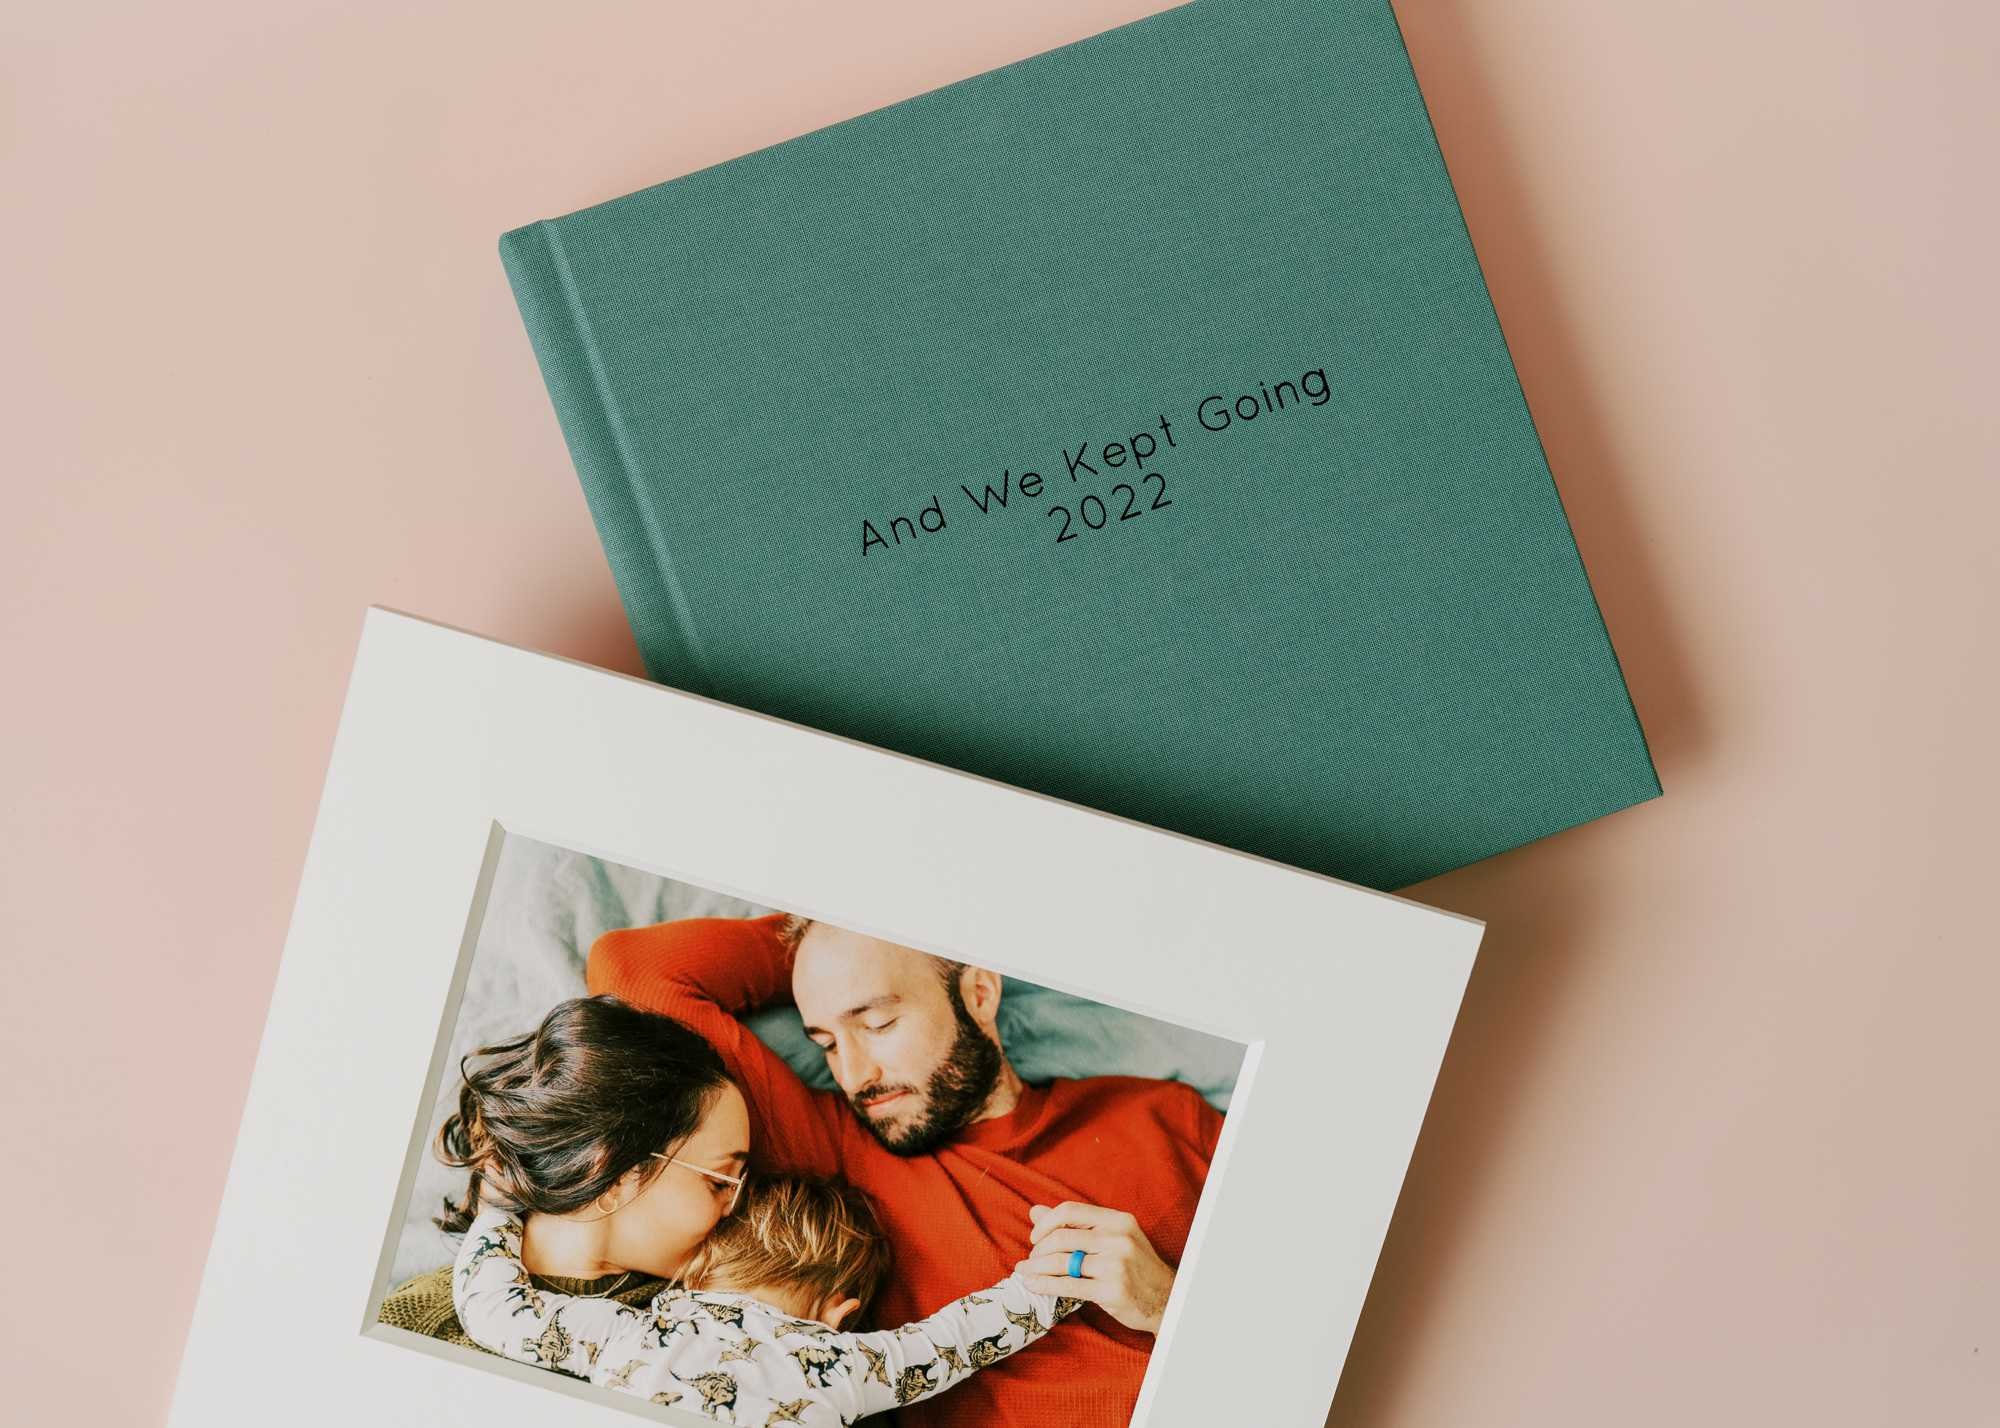 A blue photo album that says "and we kept going" on the cover